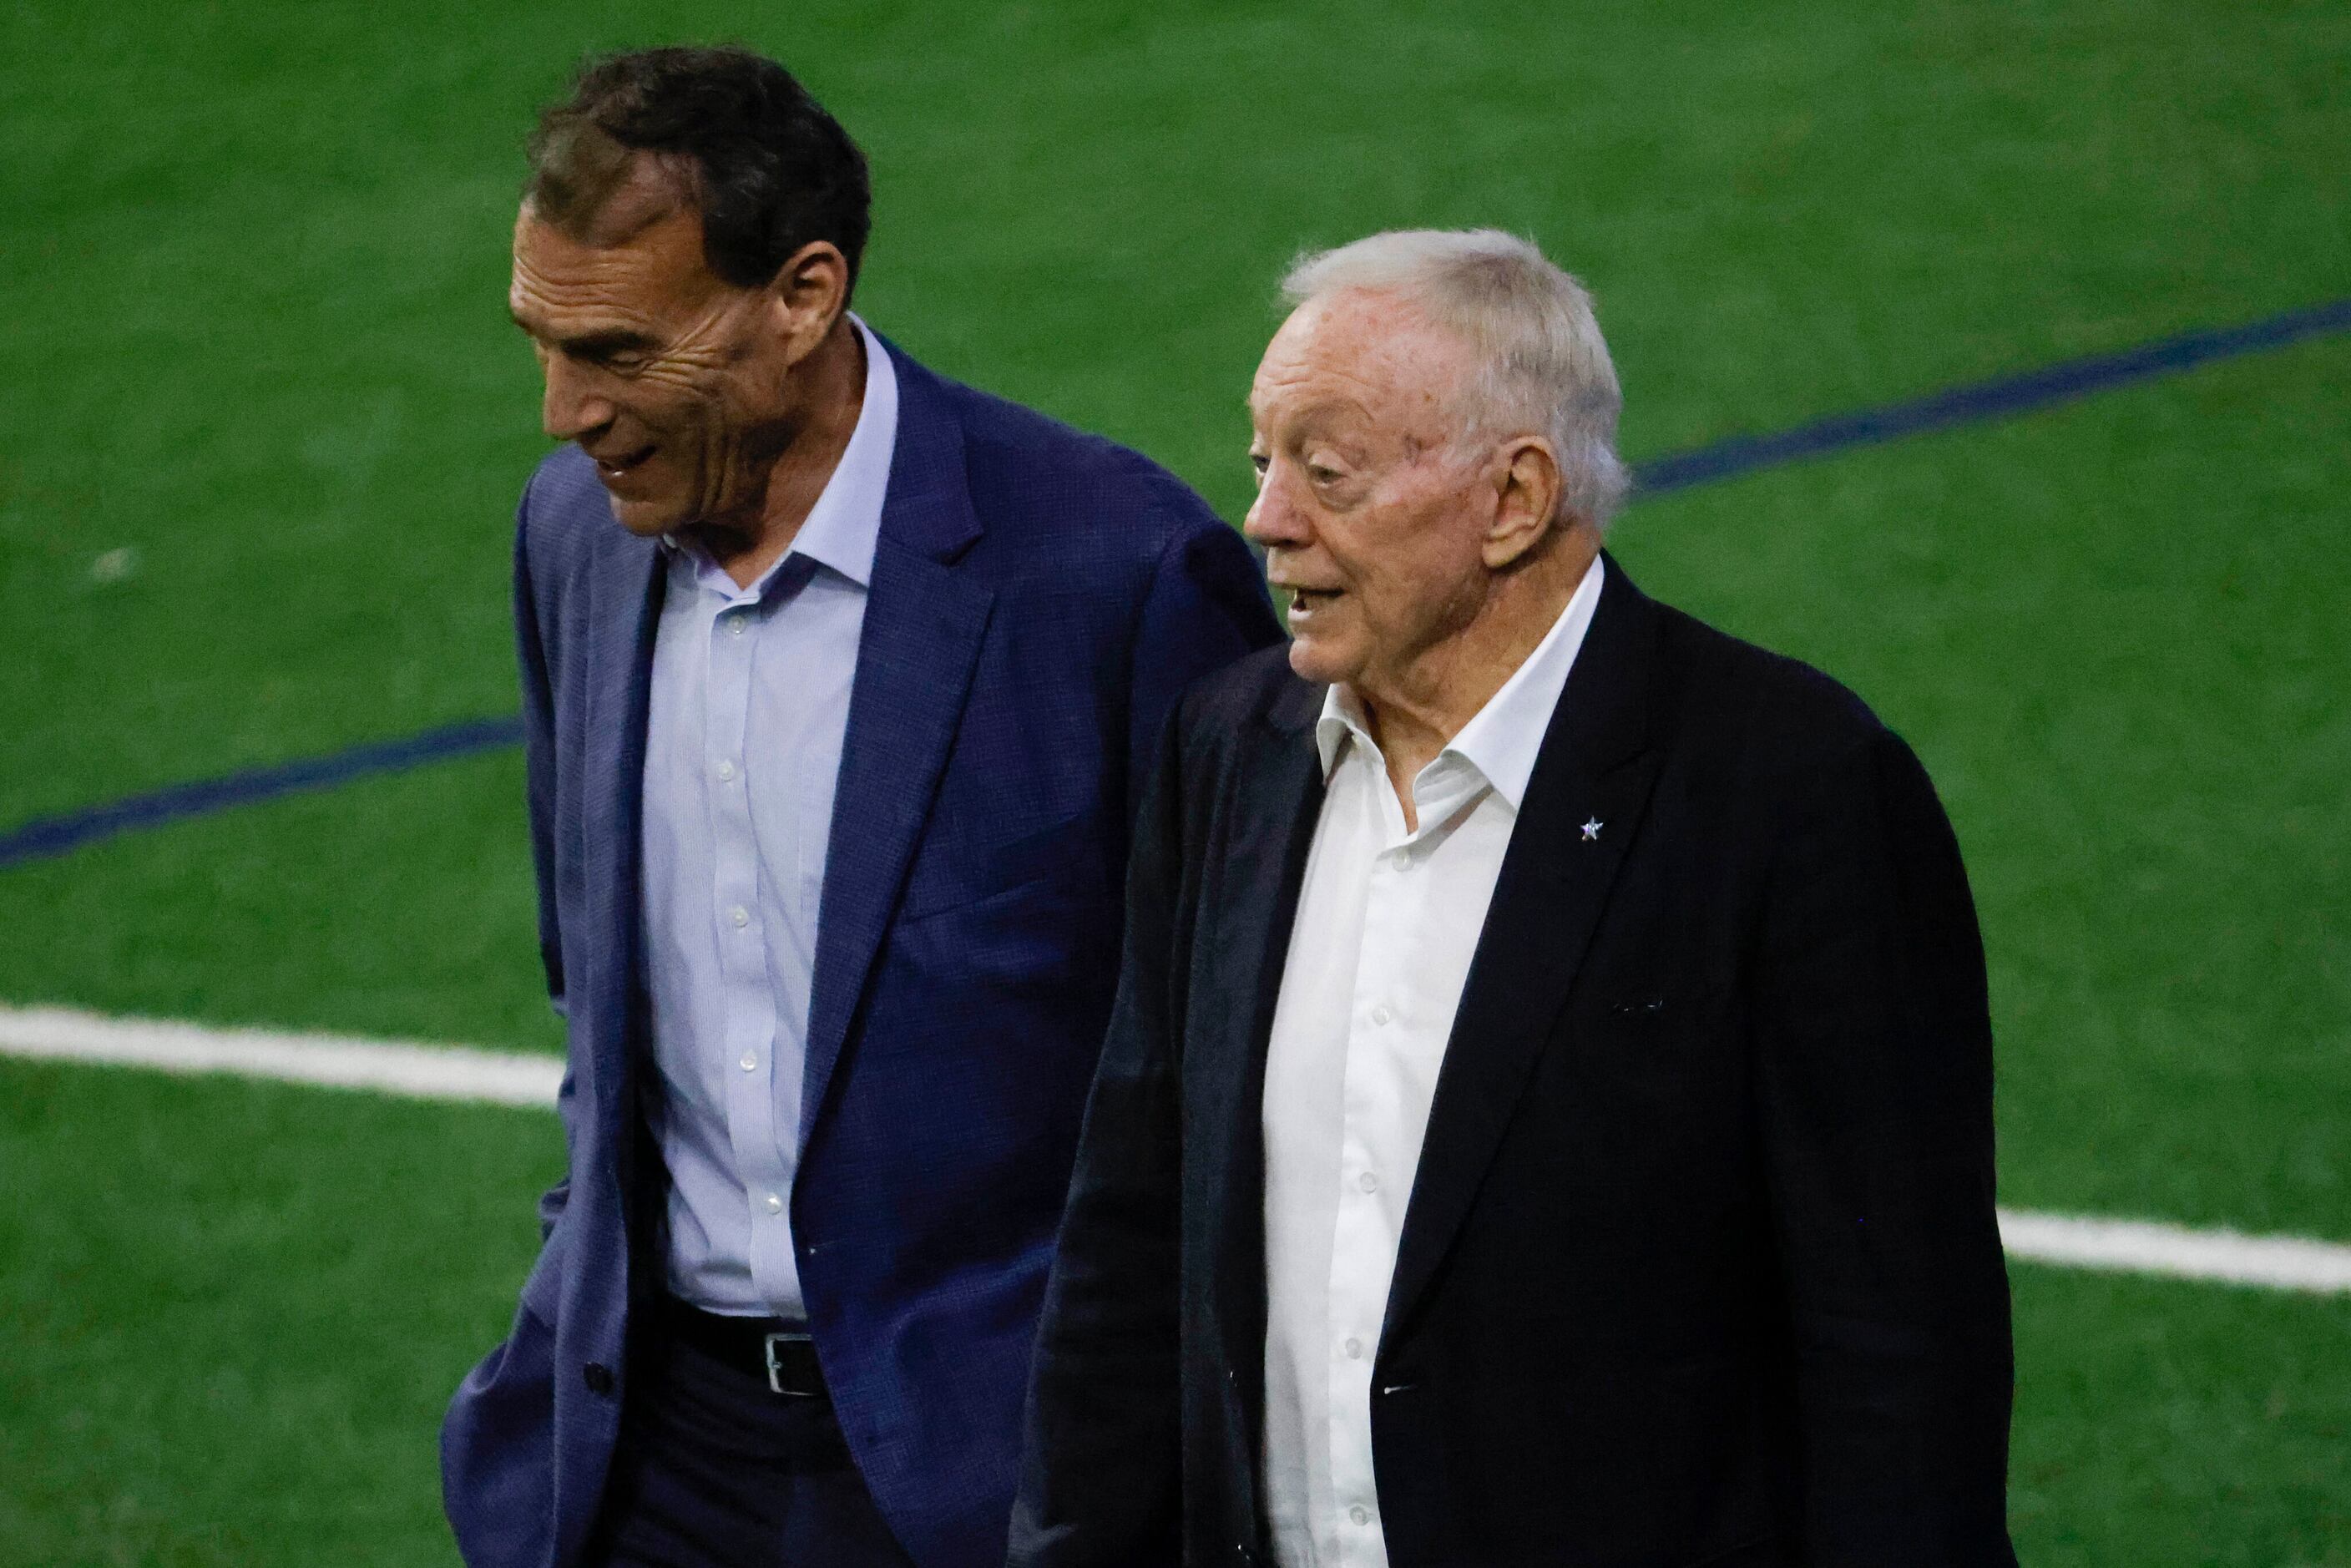 Dallas Cowboys owner Jerry Jones (right) and a business associate walks into the field...